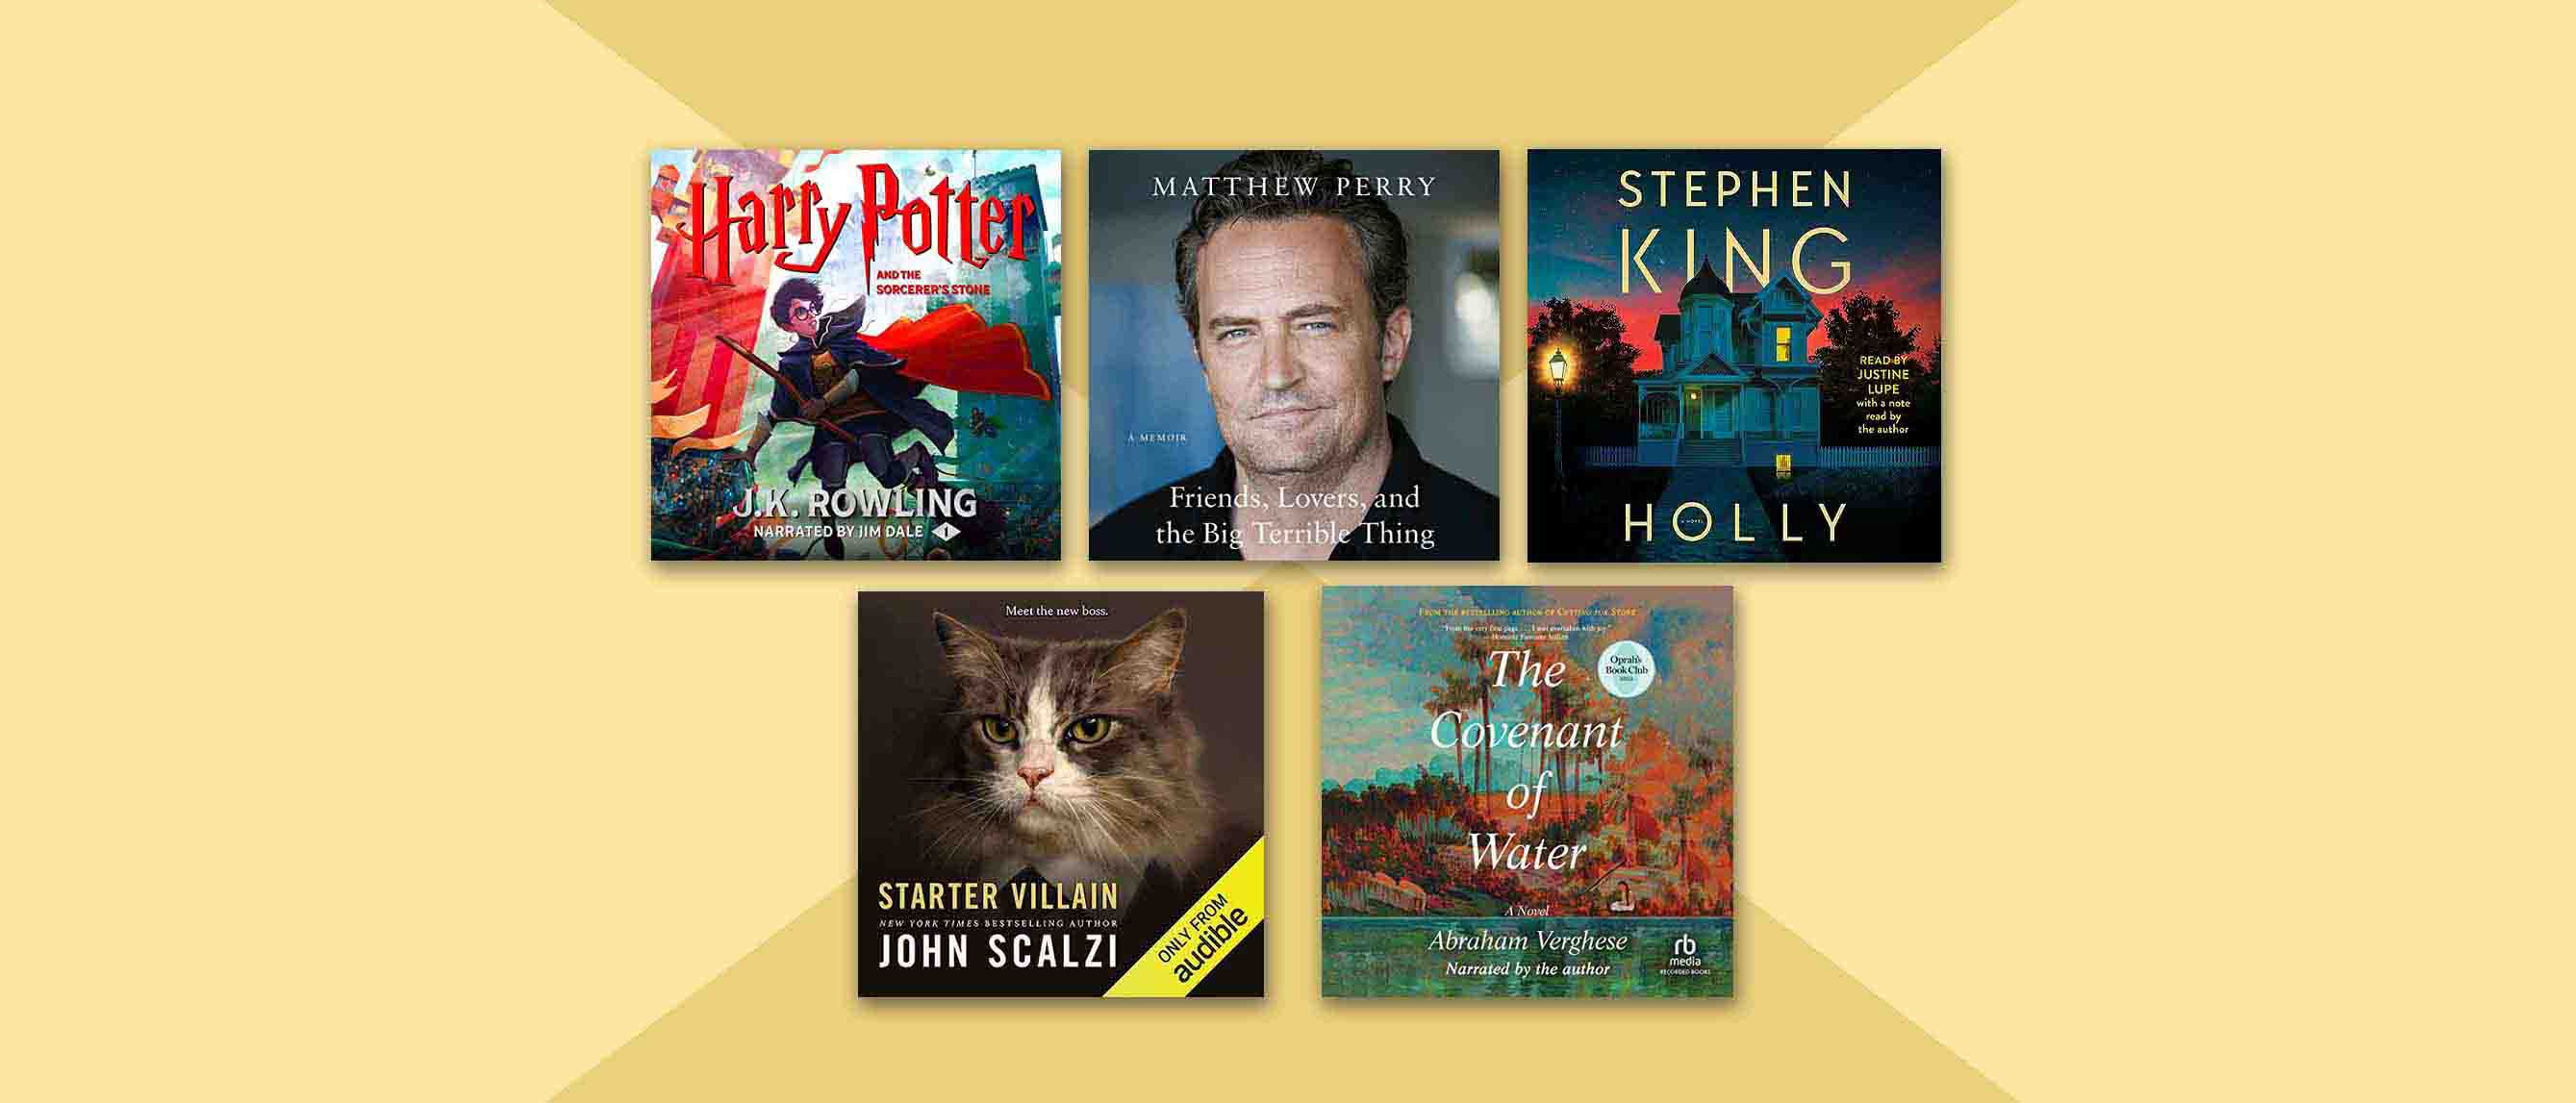 Image of 5 audible book covers